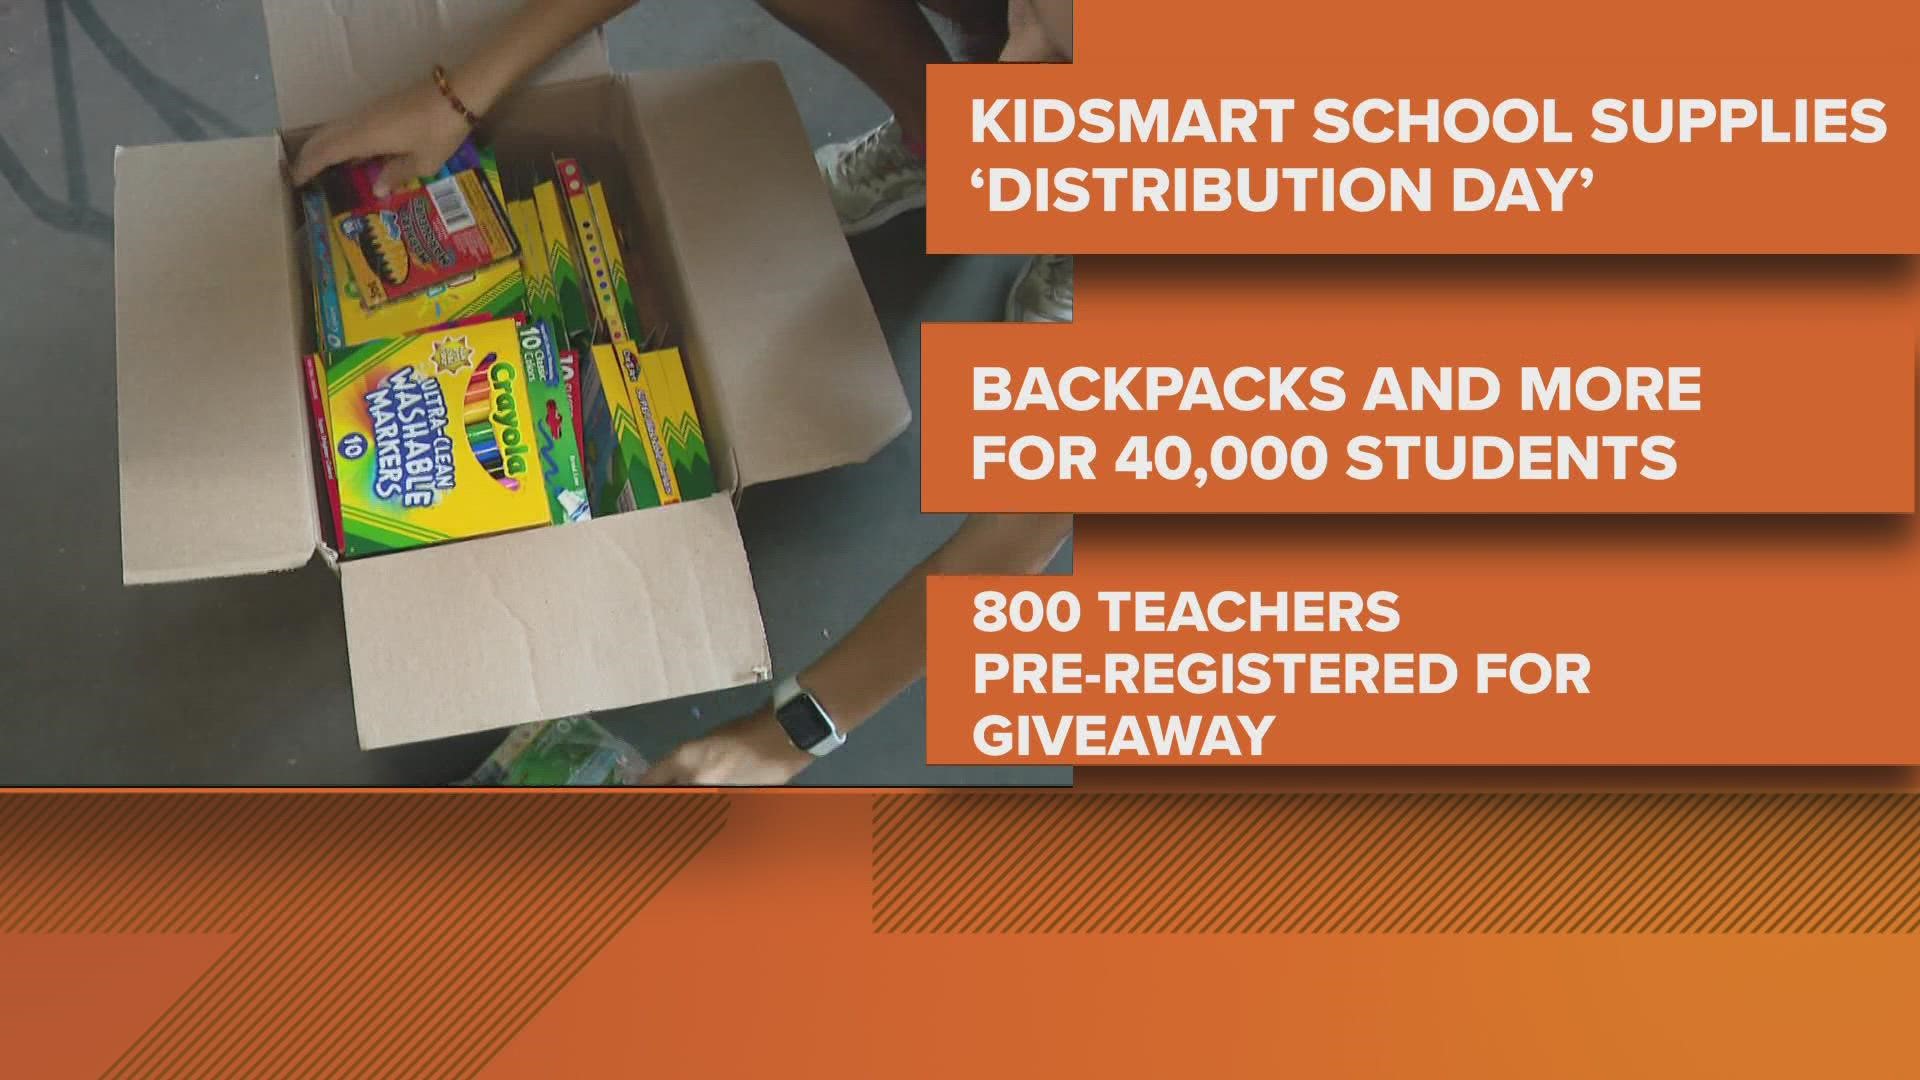 It’s time to head back to school, but 90,000 students in St. Louis aren’t able to afford school supplies. A backpack giveaway is happening Wednesday.